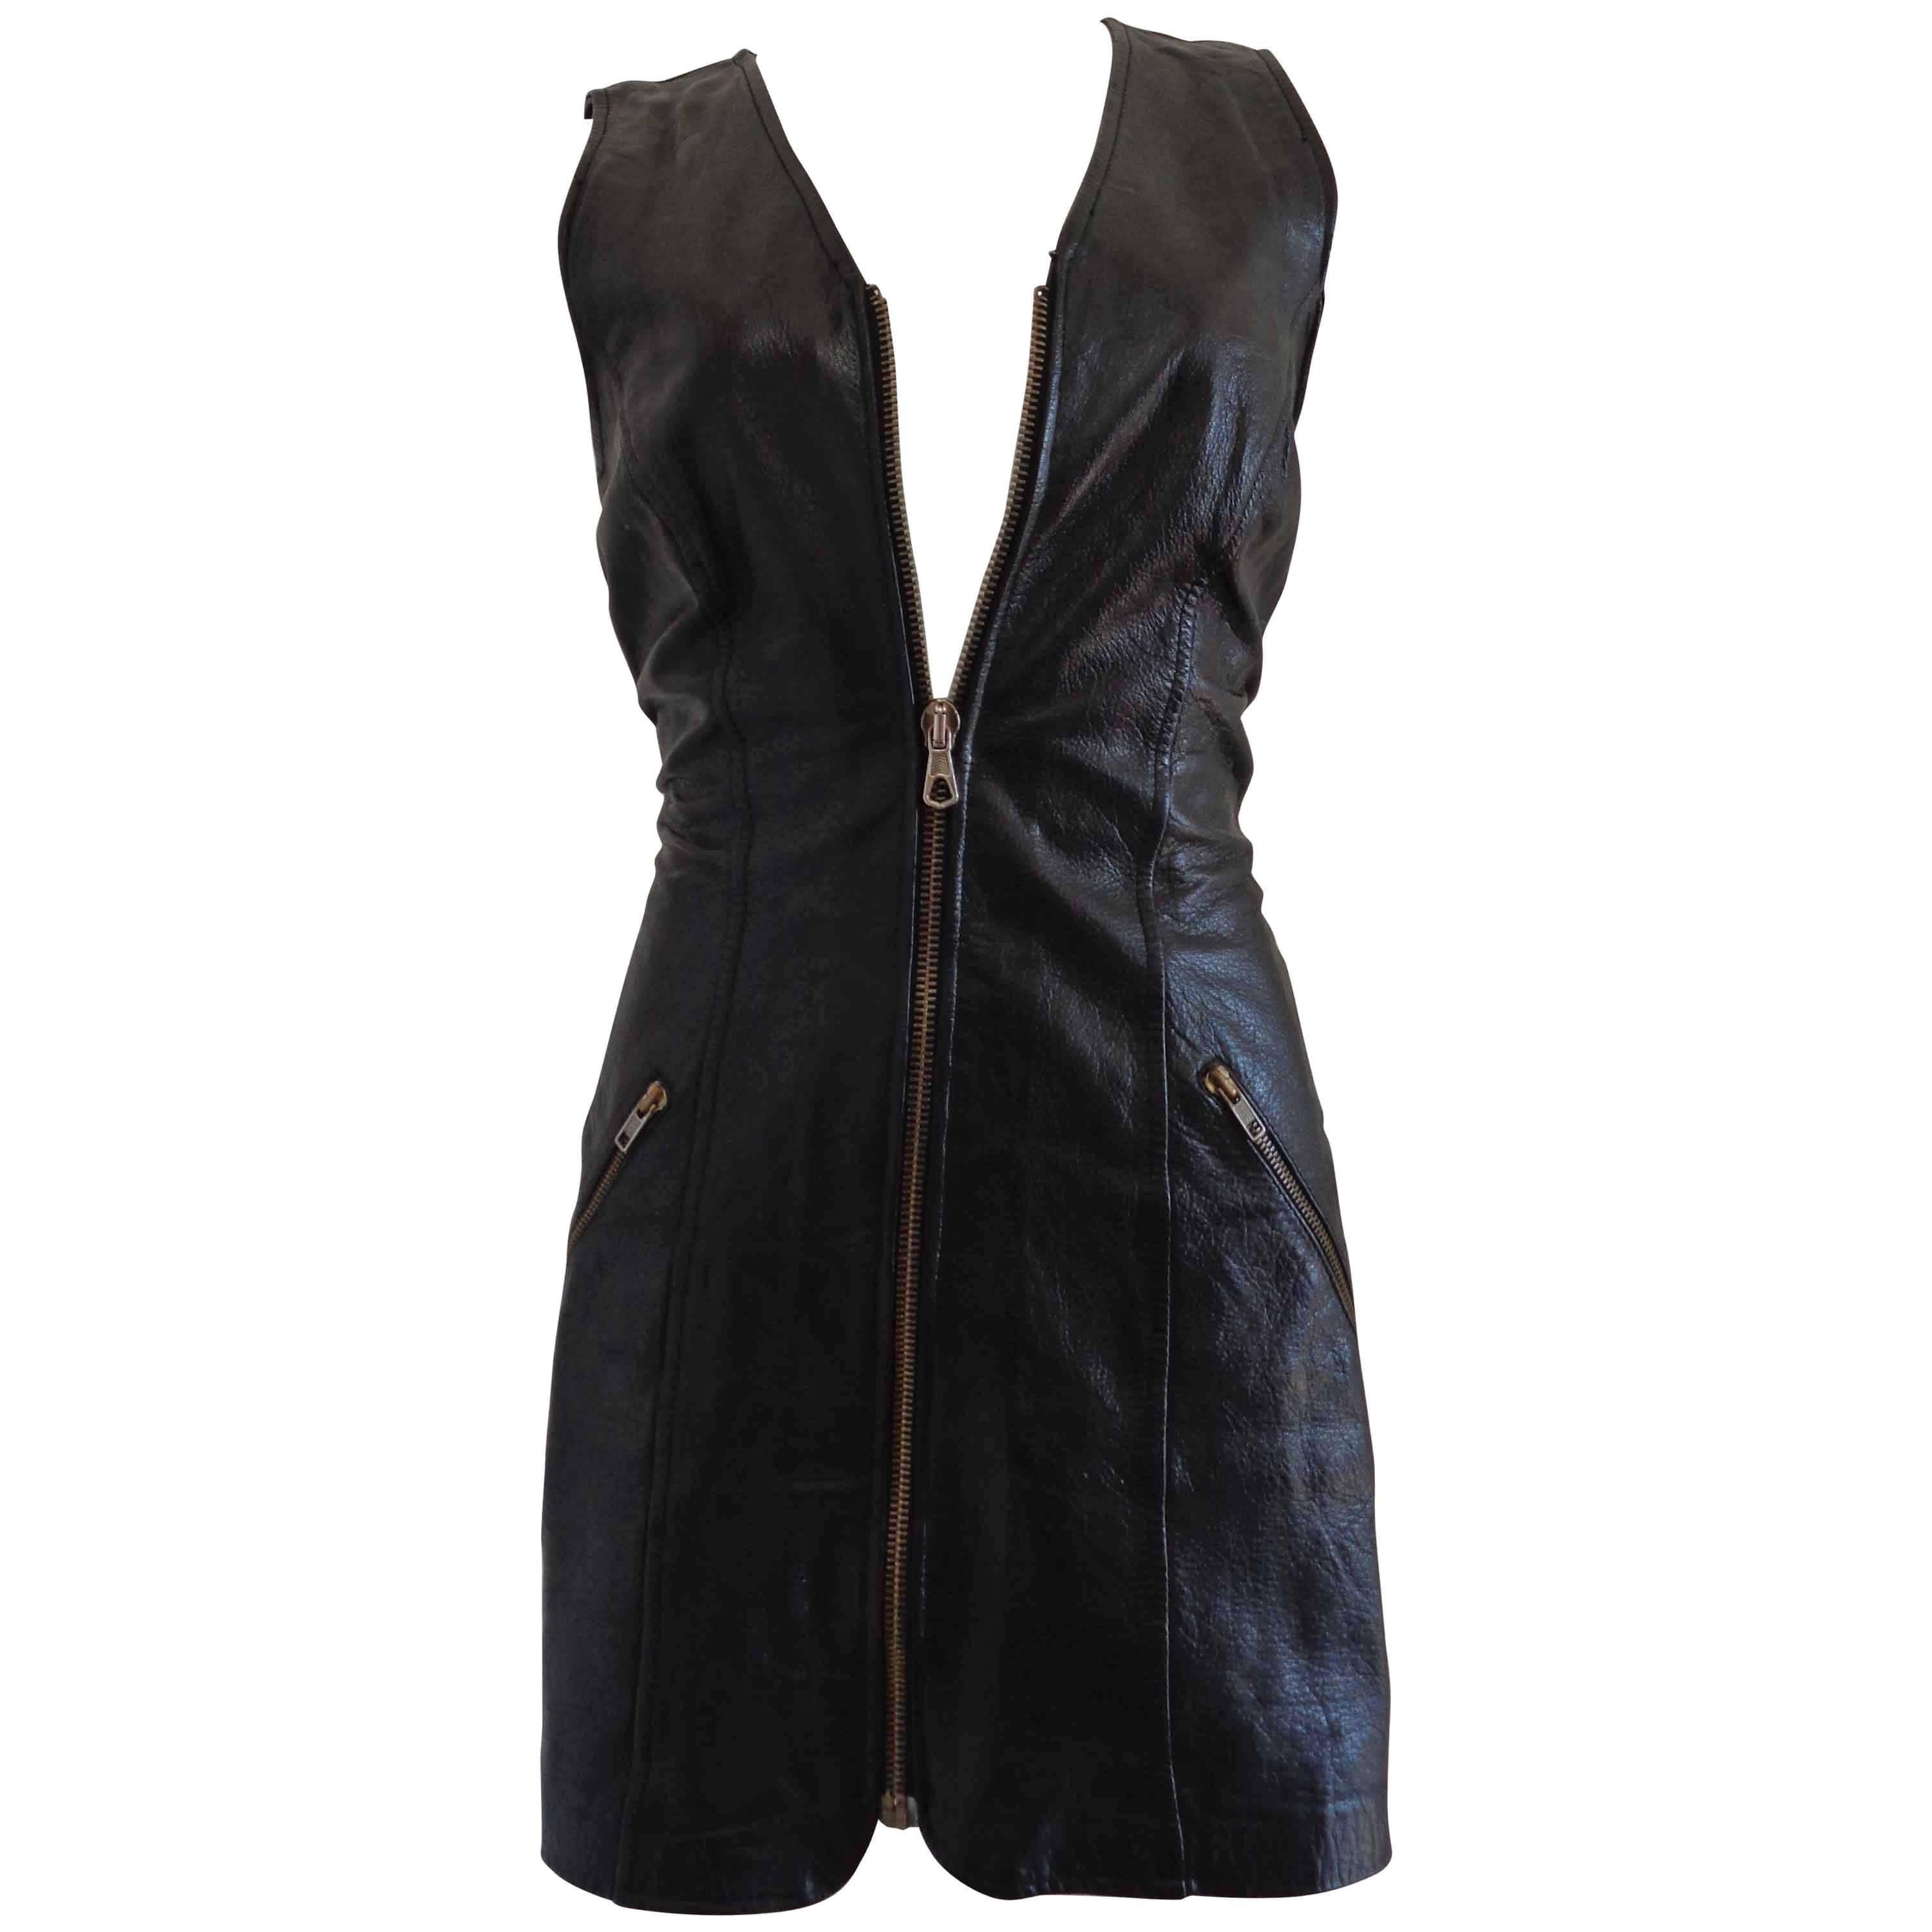 Moschino Cheap & Chic Black Leather Dress For Sale